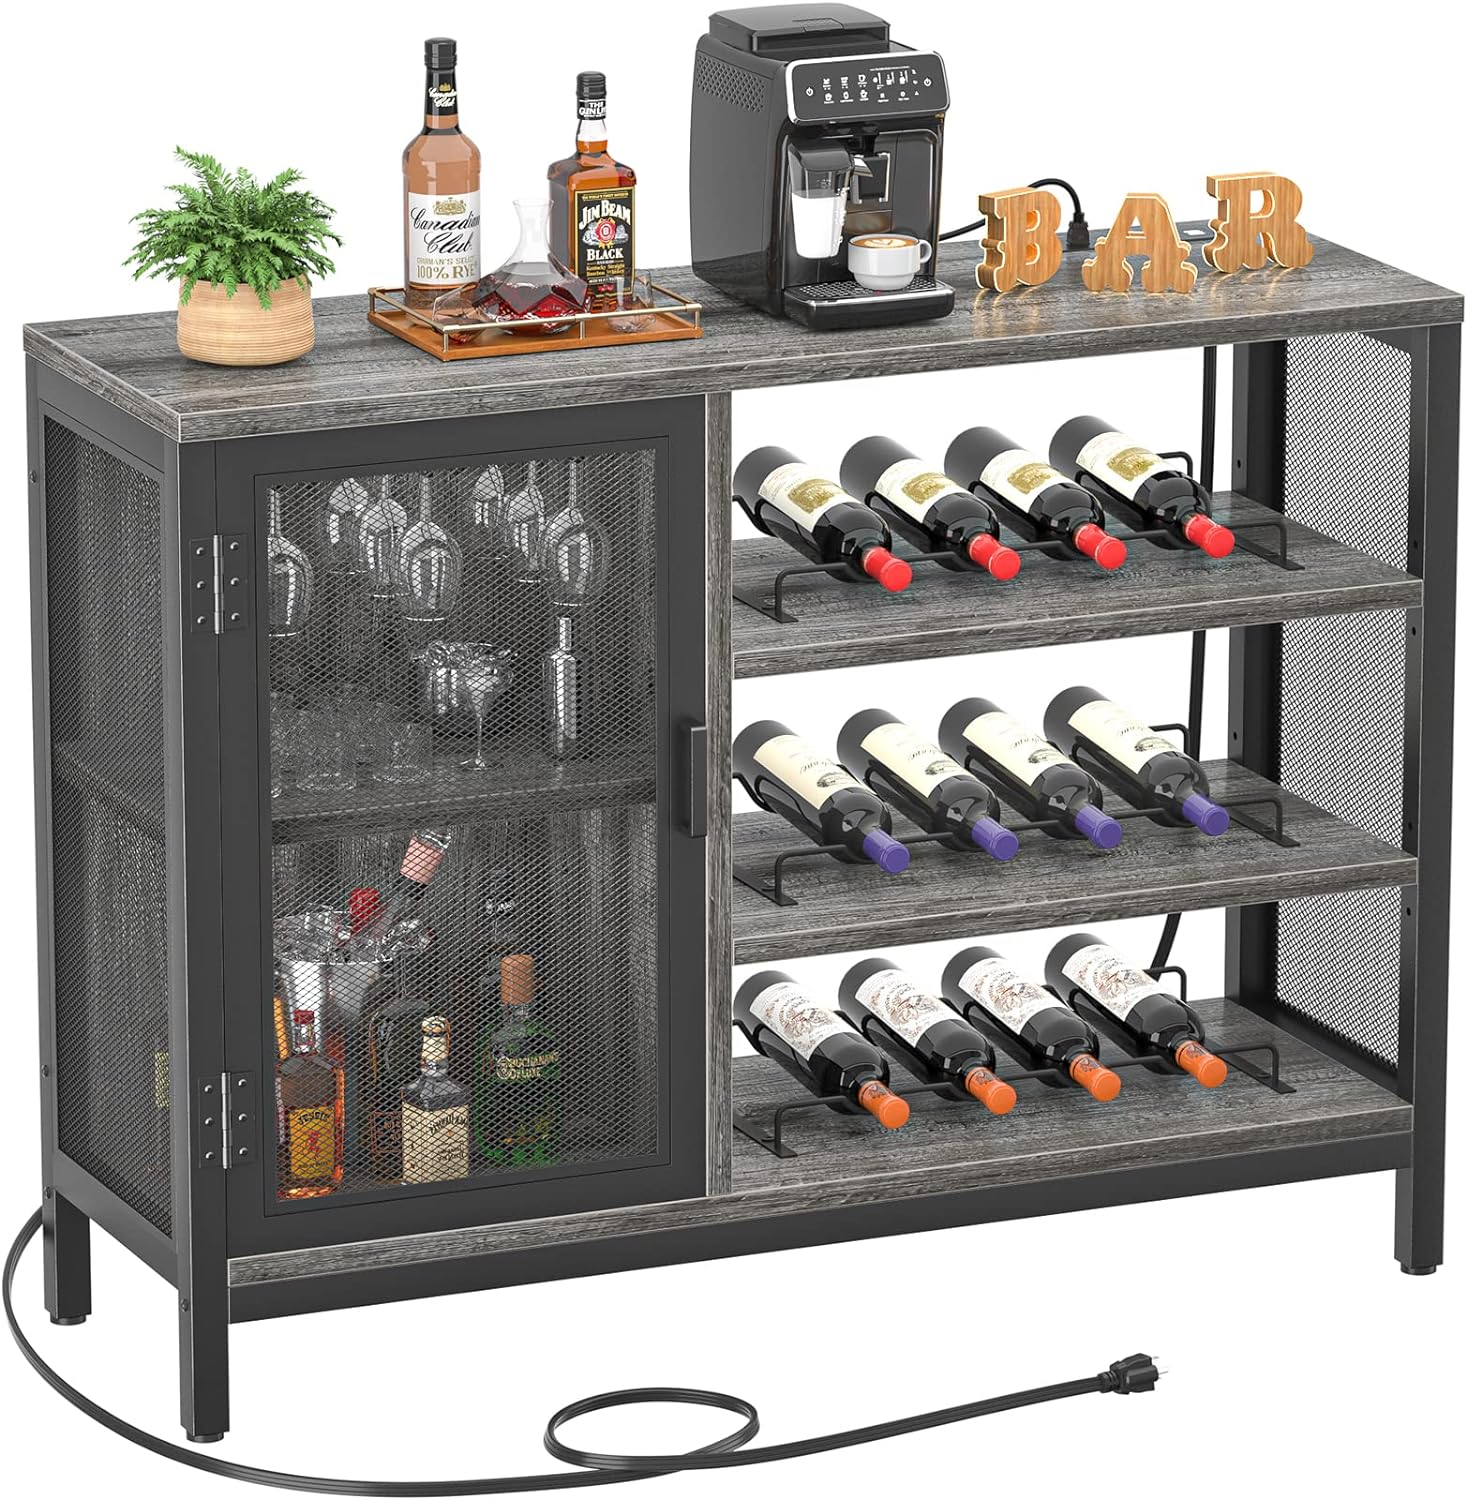 Homieasy Wine Bar Cabinet with Power Outlets, Industrial Bar Cabinets for Liquor and Glasses, Farmhouse Mini Coffee Bar Liquor Cabinet Bar for Home with Removable Wine Racks, Balck Oak